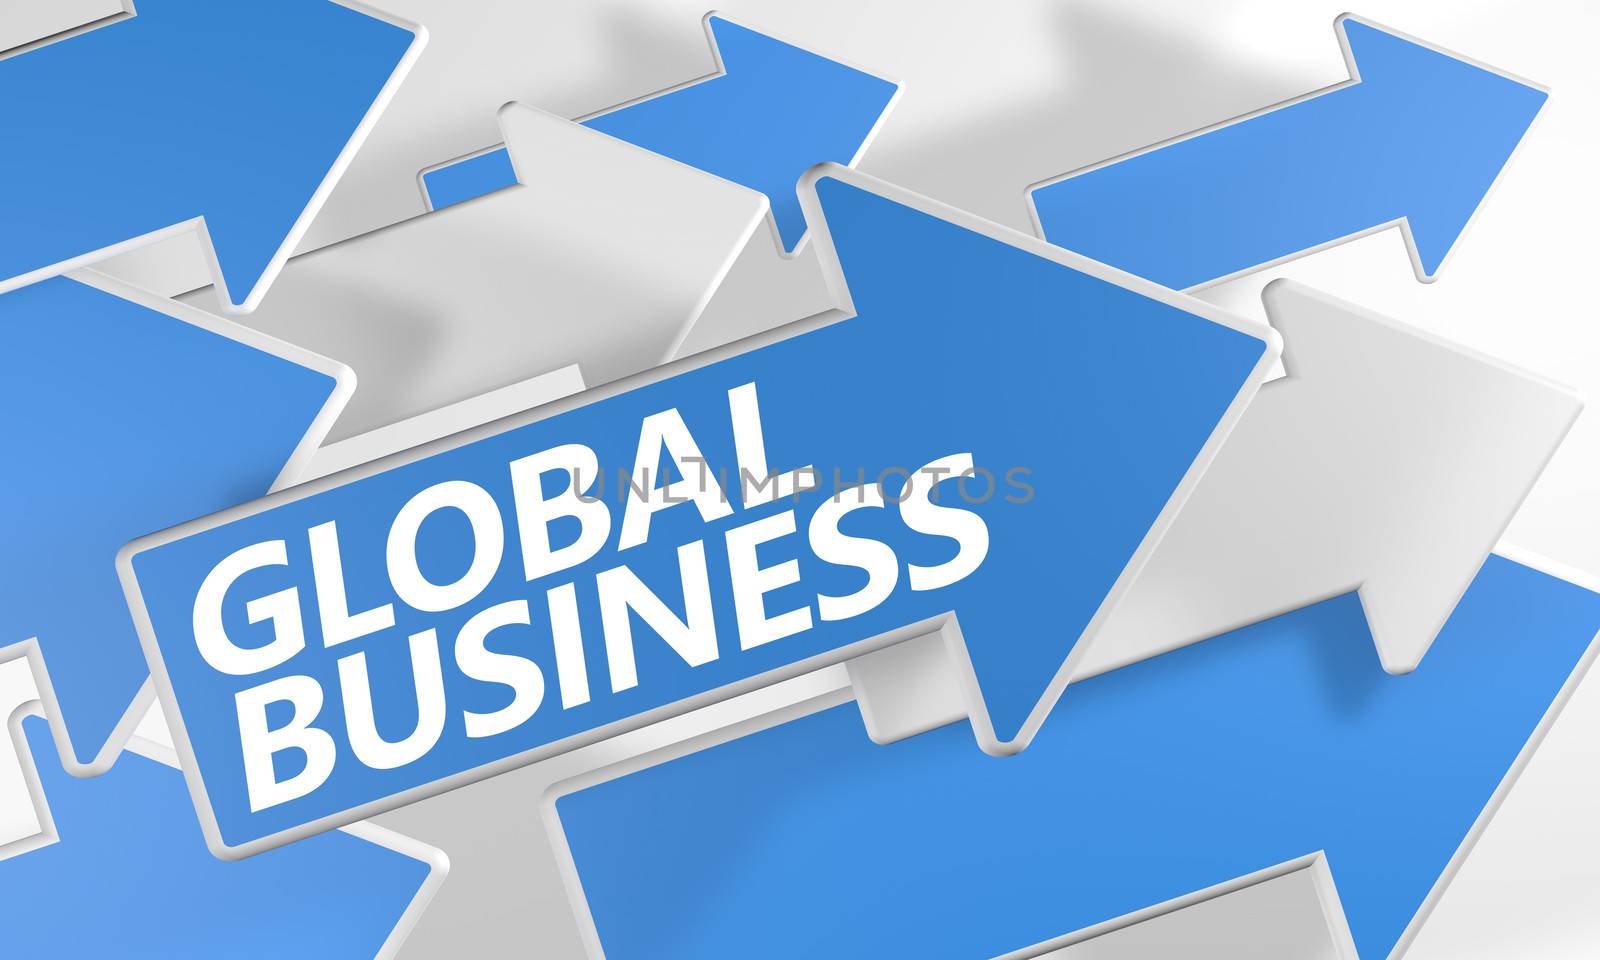 Global Business 3d render concept with blue and white arrows flying over a white background.